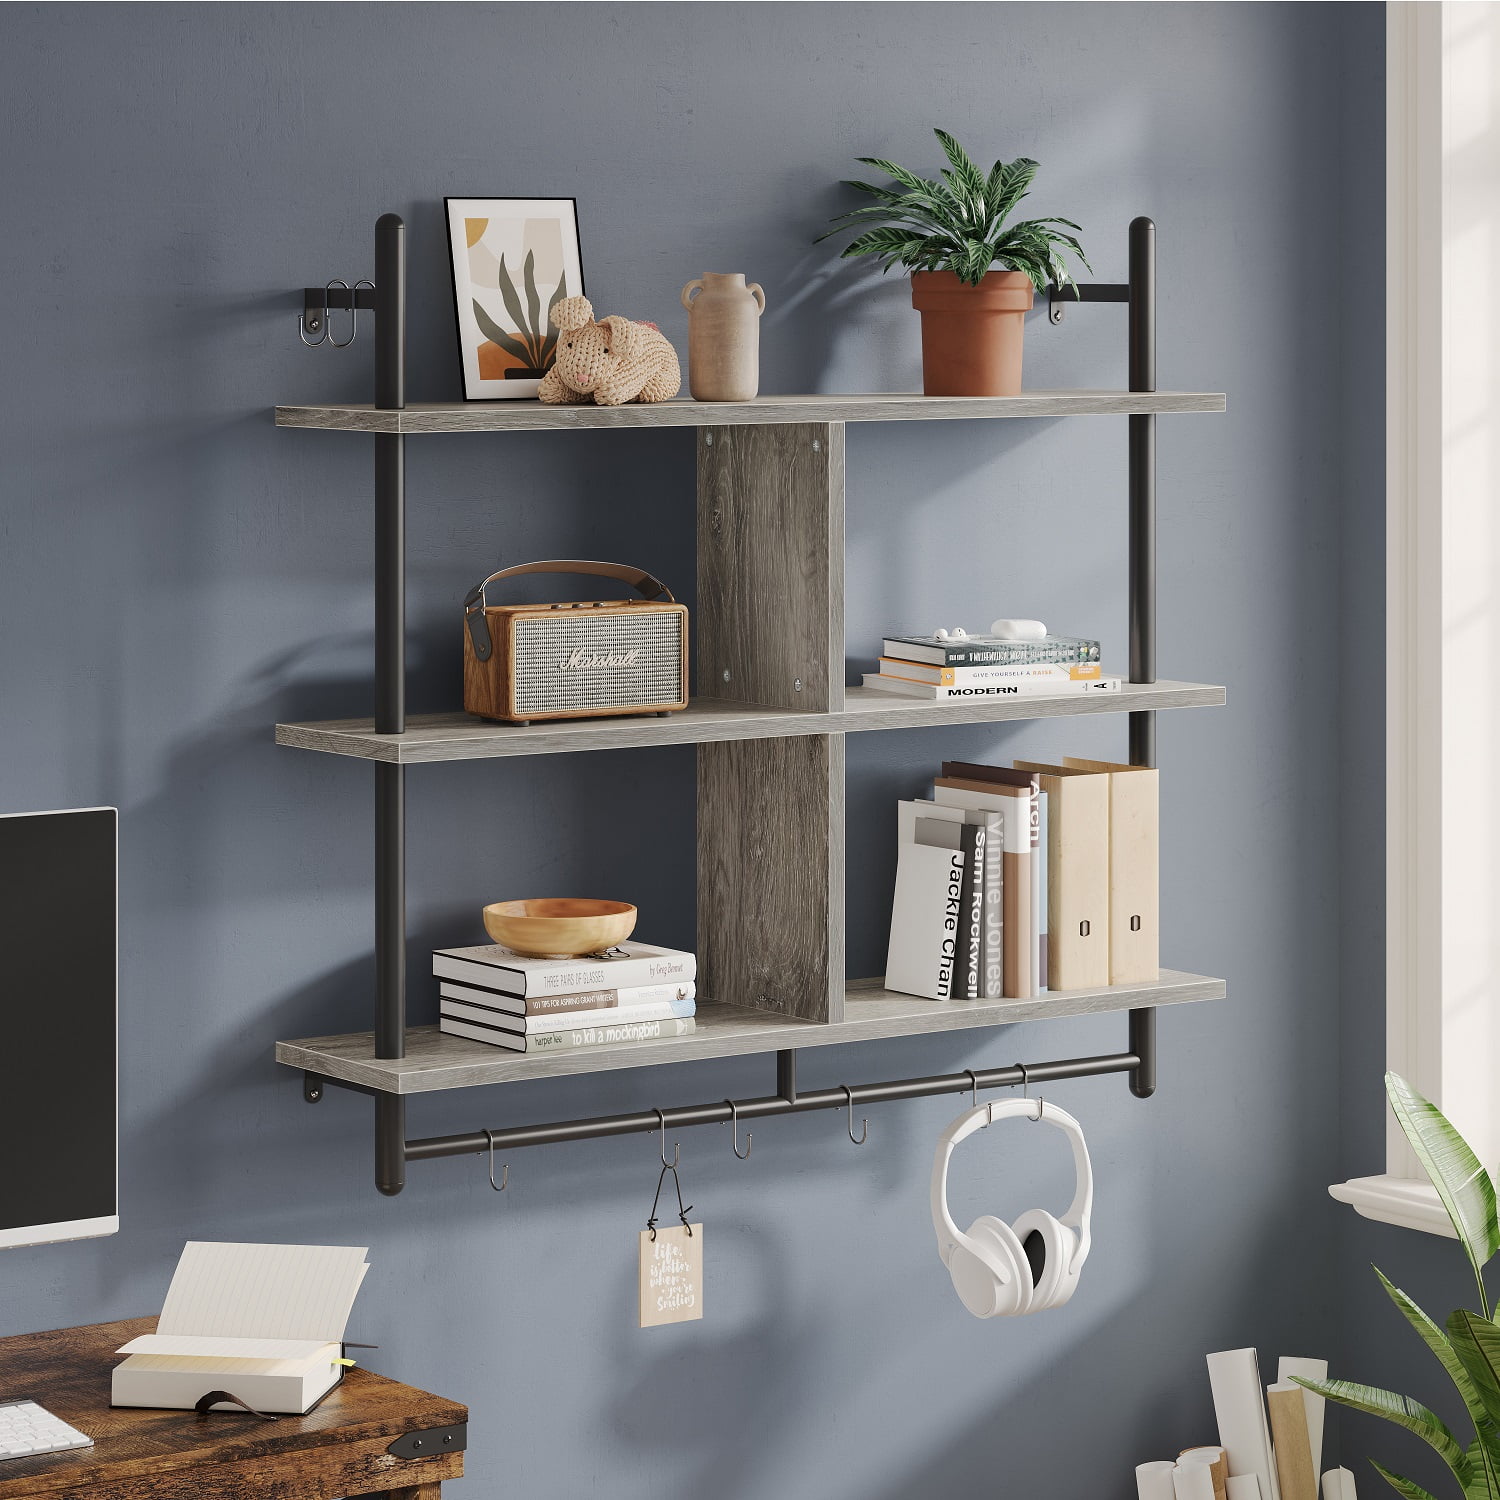 Bestier LED Kitchen Floating Shelves, 34 Industrial Pipe Shelves with  Adjustable Glass Shelves, Wall Mounted Shelf